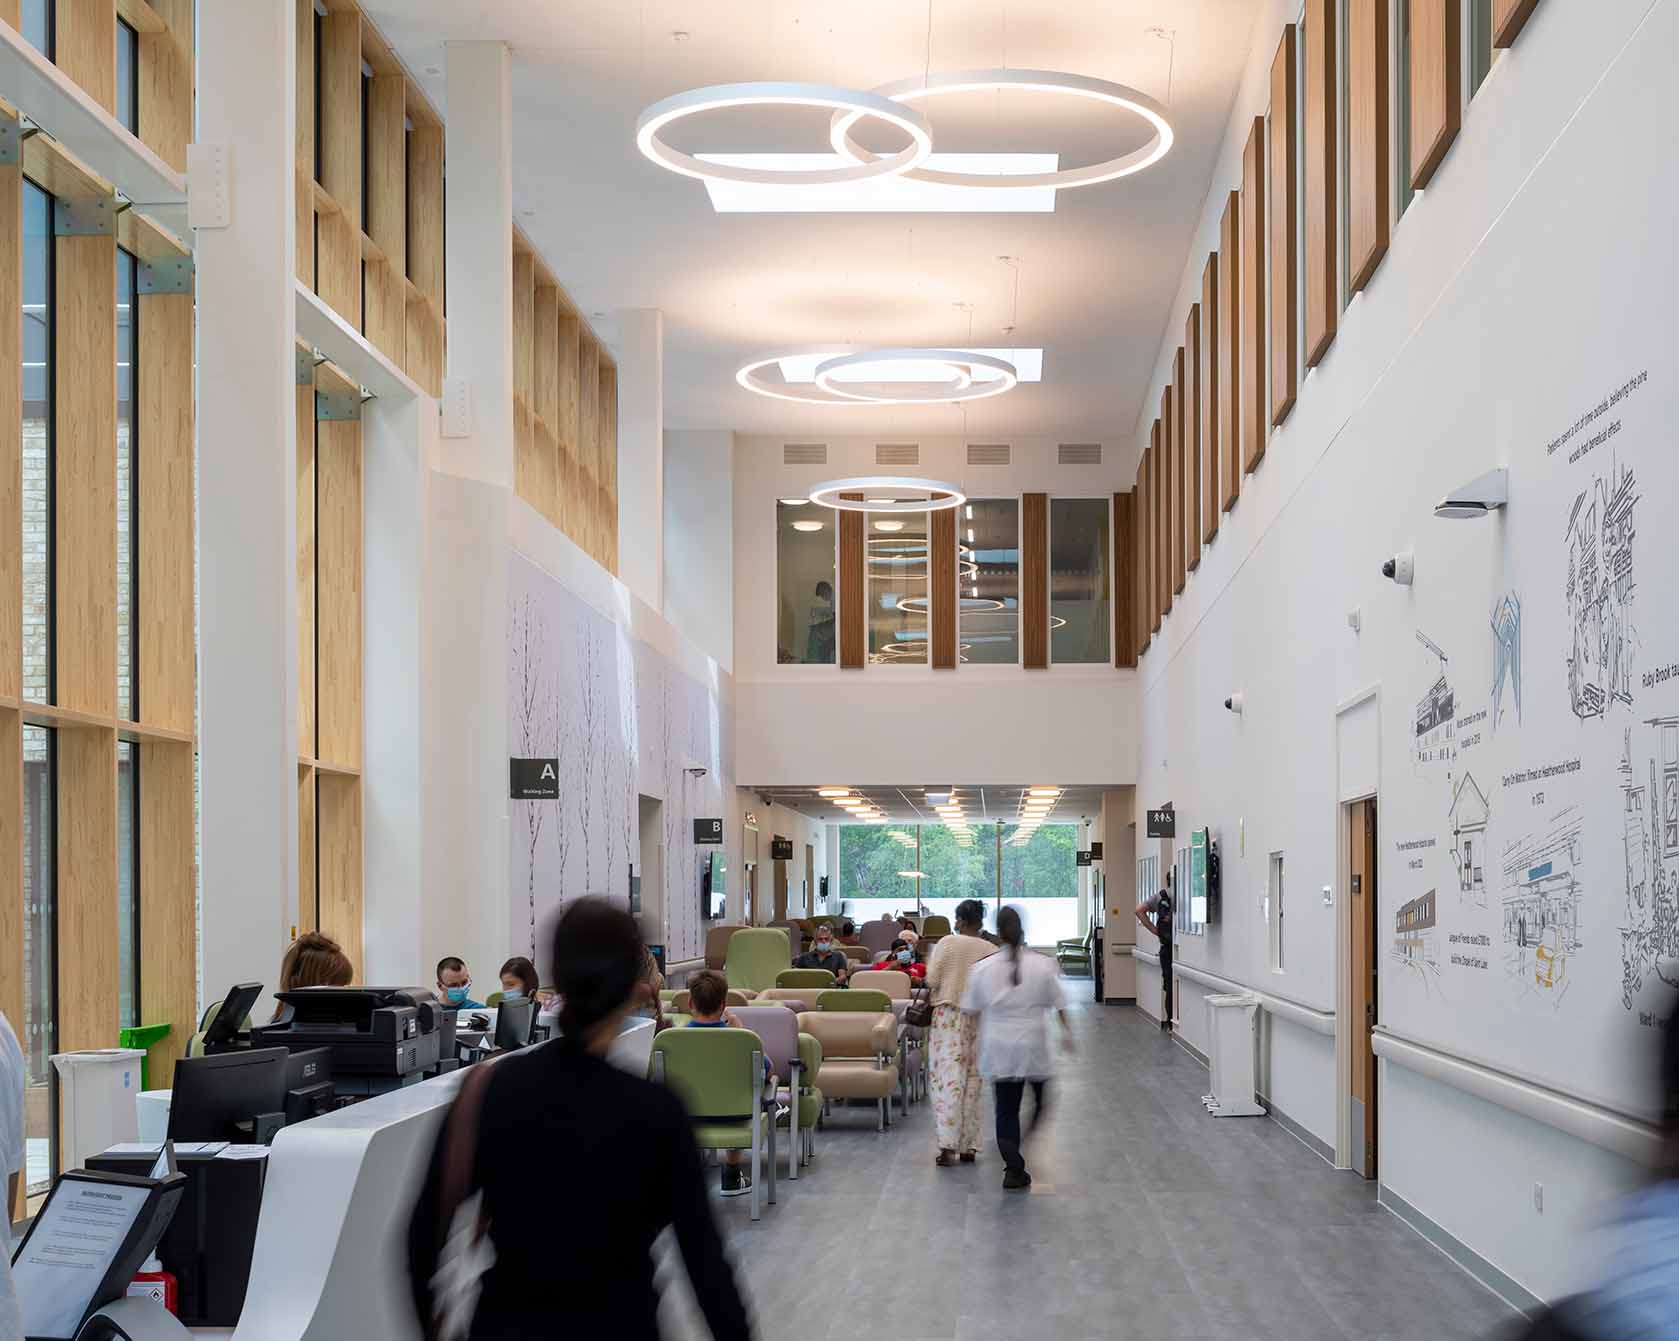 Hospitals can be stressful and intimidating places so biophilic design was key to our approach to create a calm and restorative environment that supports wellbeing and recovery.